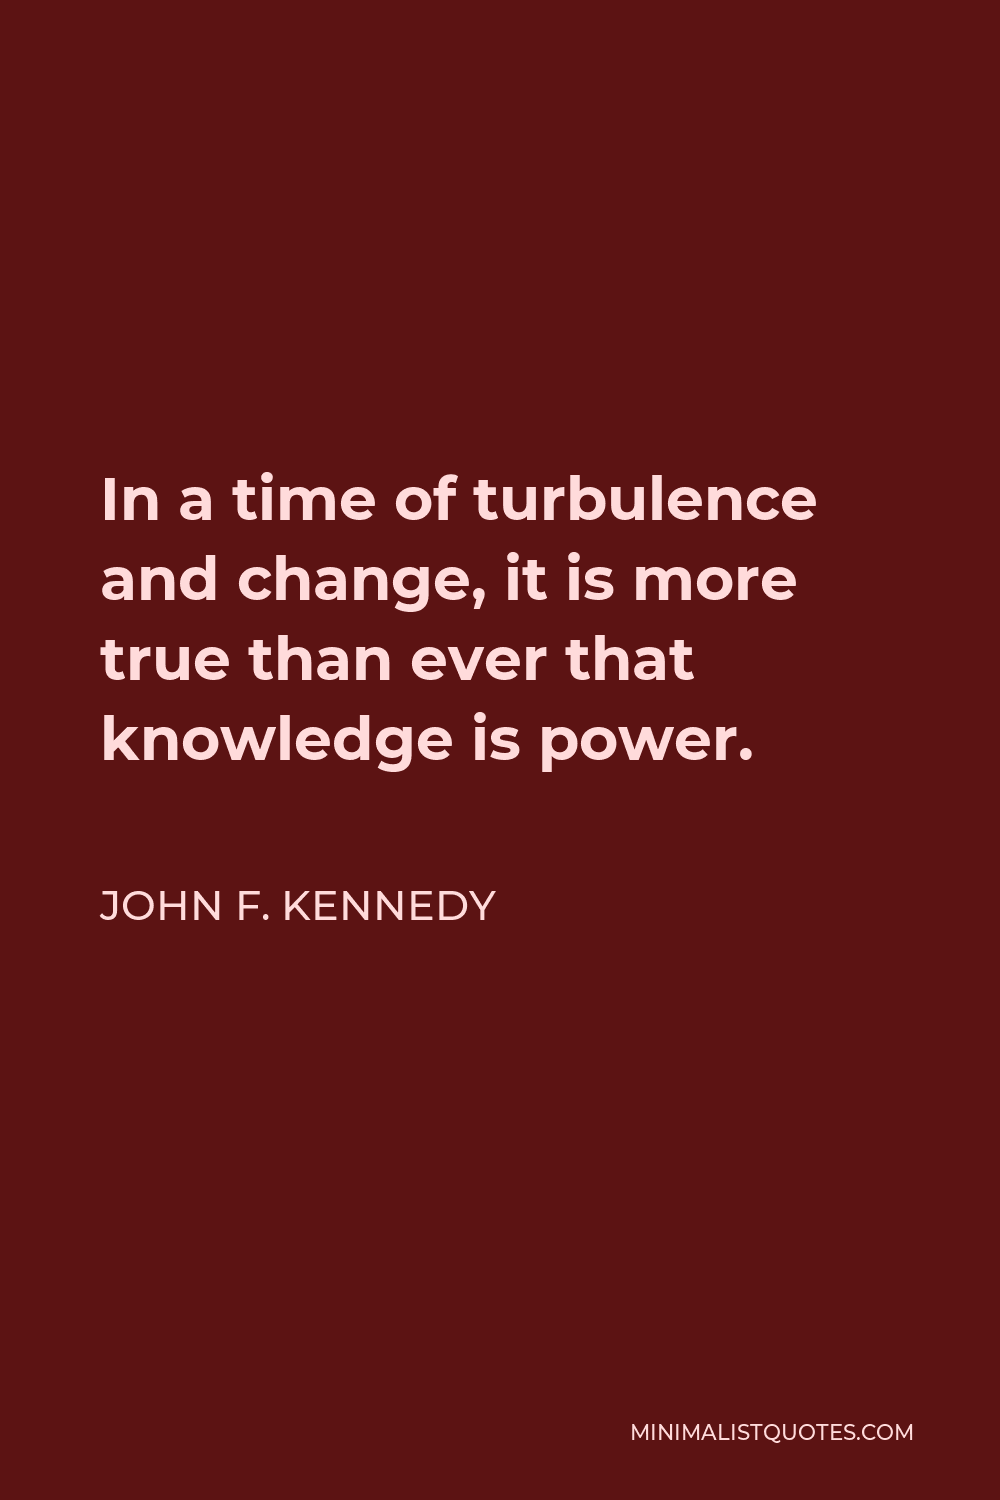 John F. Kennedy Quote - In a time of turbulence and change, it is more true than ever that knowledge is power.